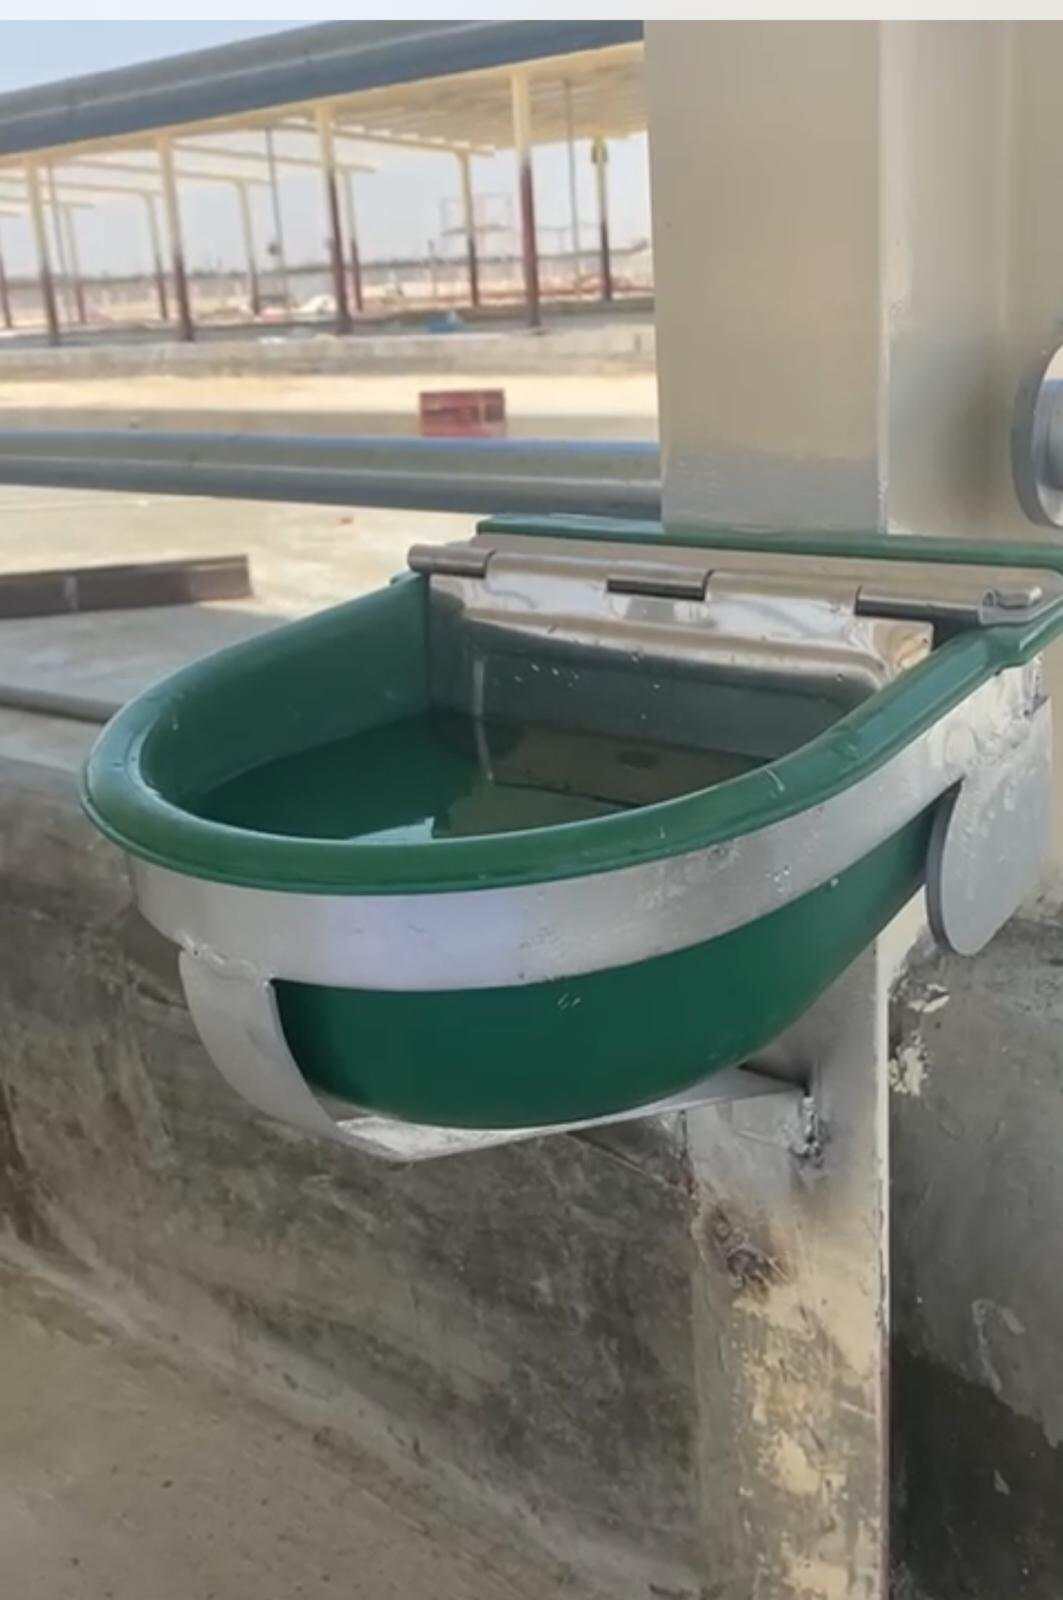 Installation of drinking water bowls